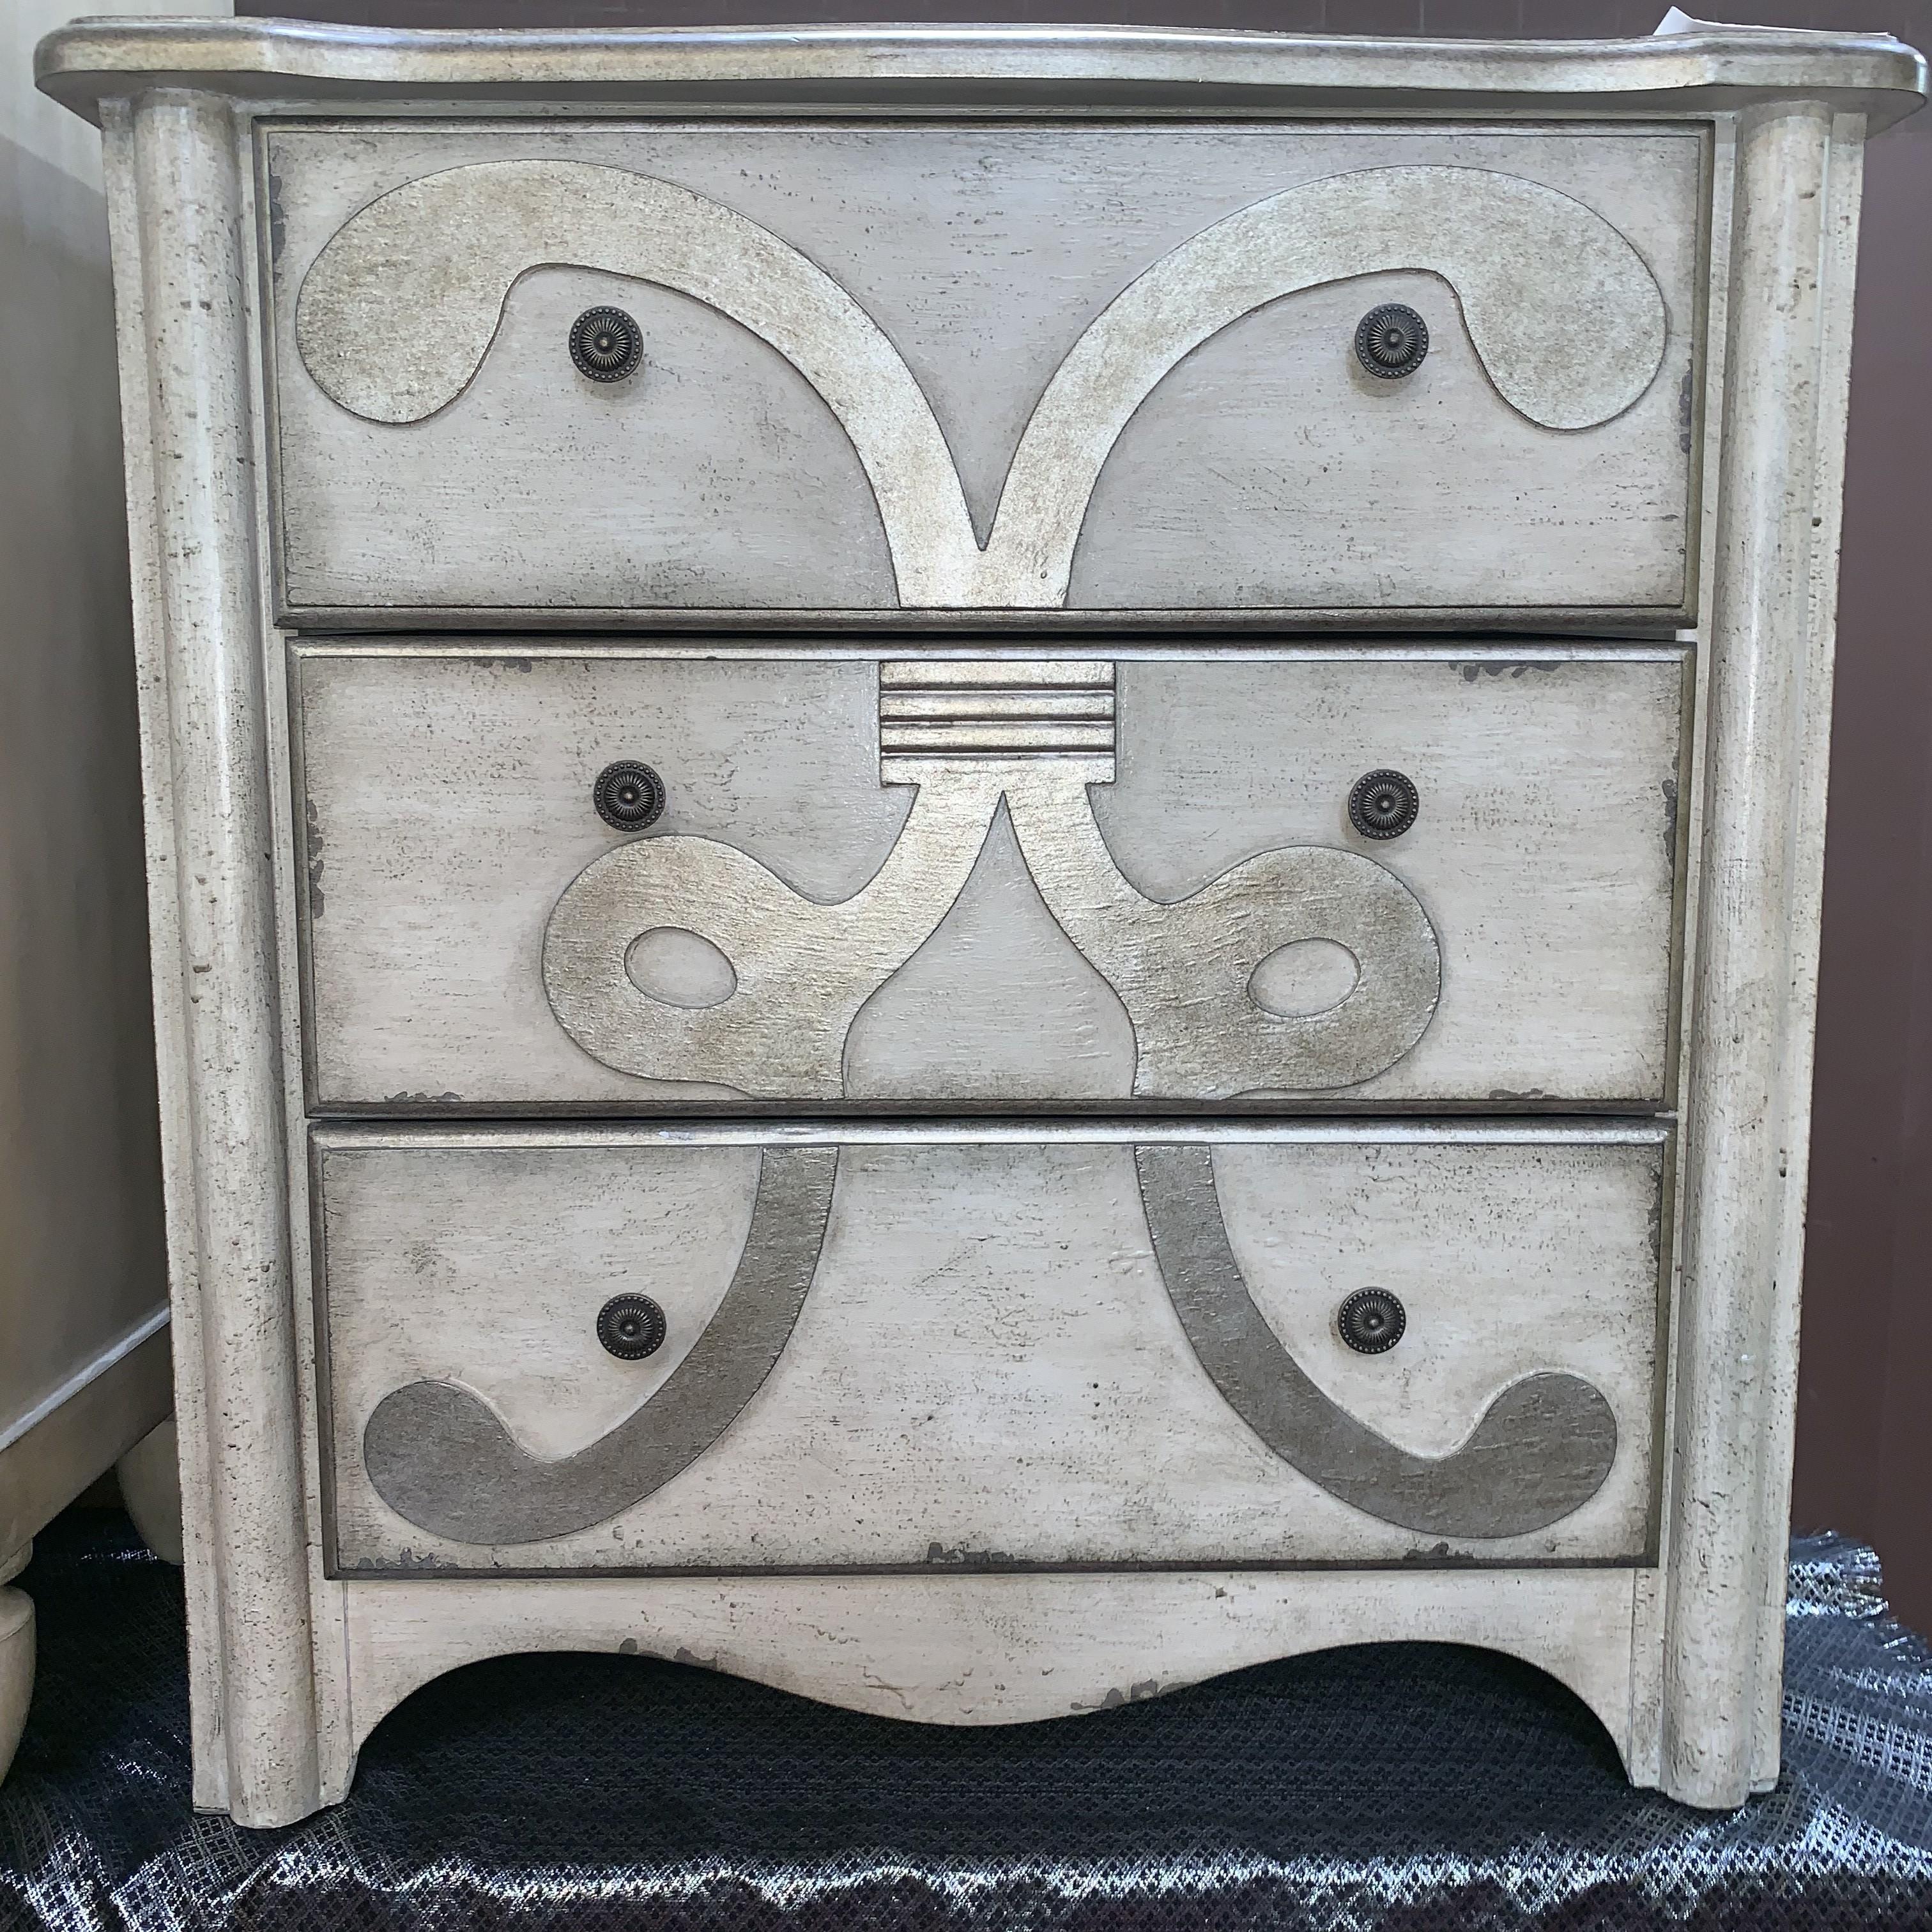 NEW DESIGNER FROM WMC - "ALMA" THREE DRAWER CHEST 211.00 - A MUST HAVE!!